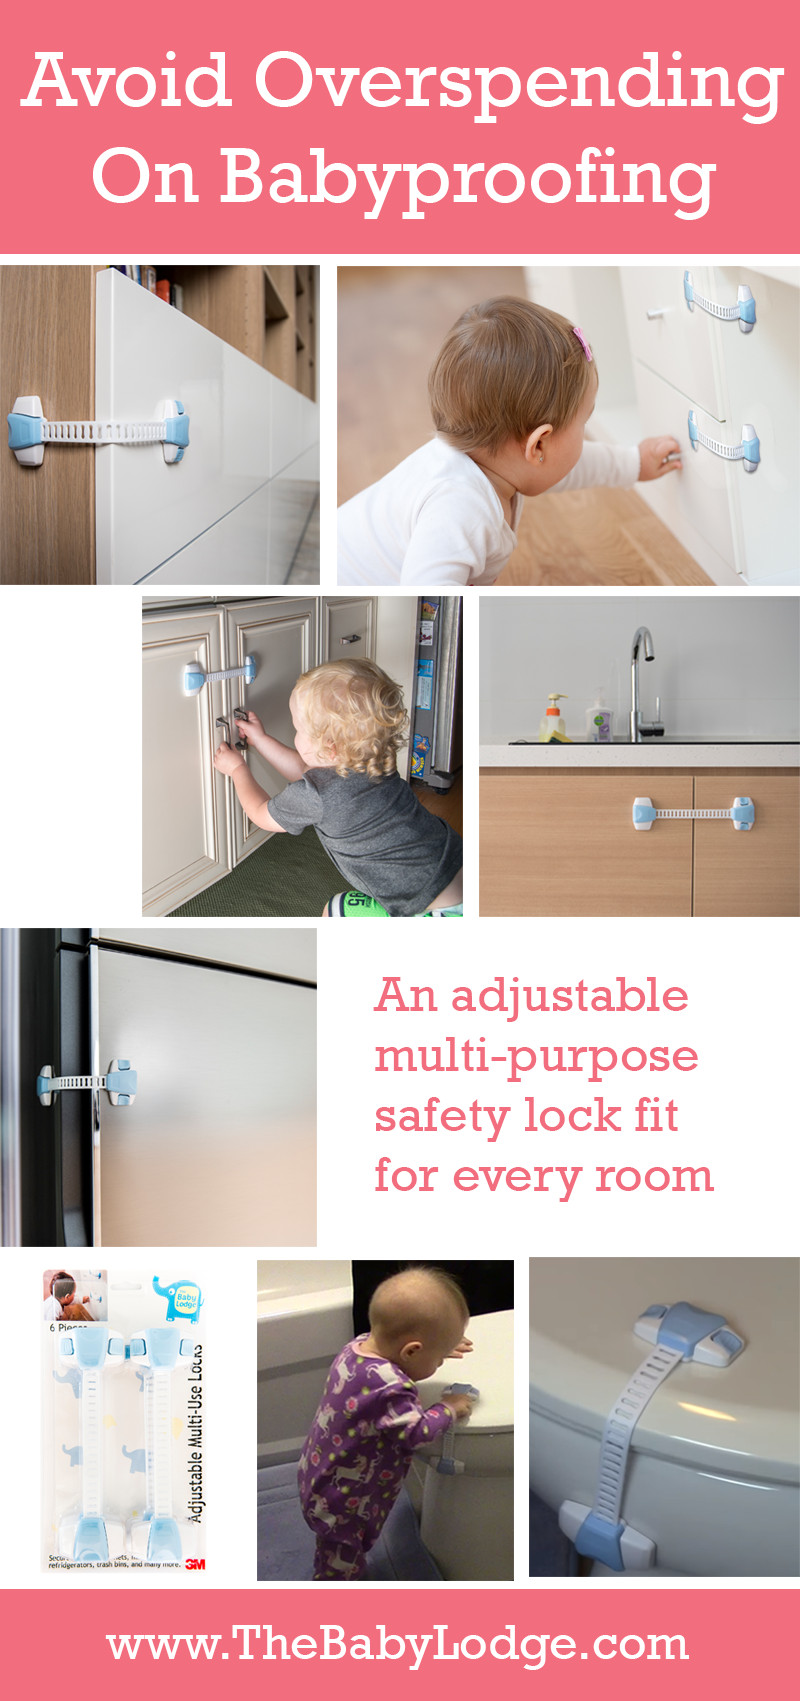 Diy Child Proof Cabinets
 Don t overspend on babyproofing your home These baby